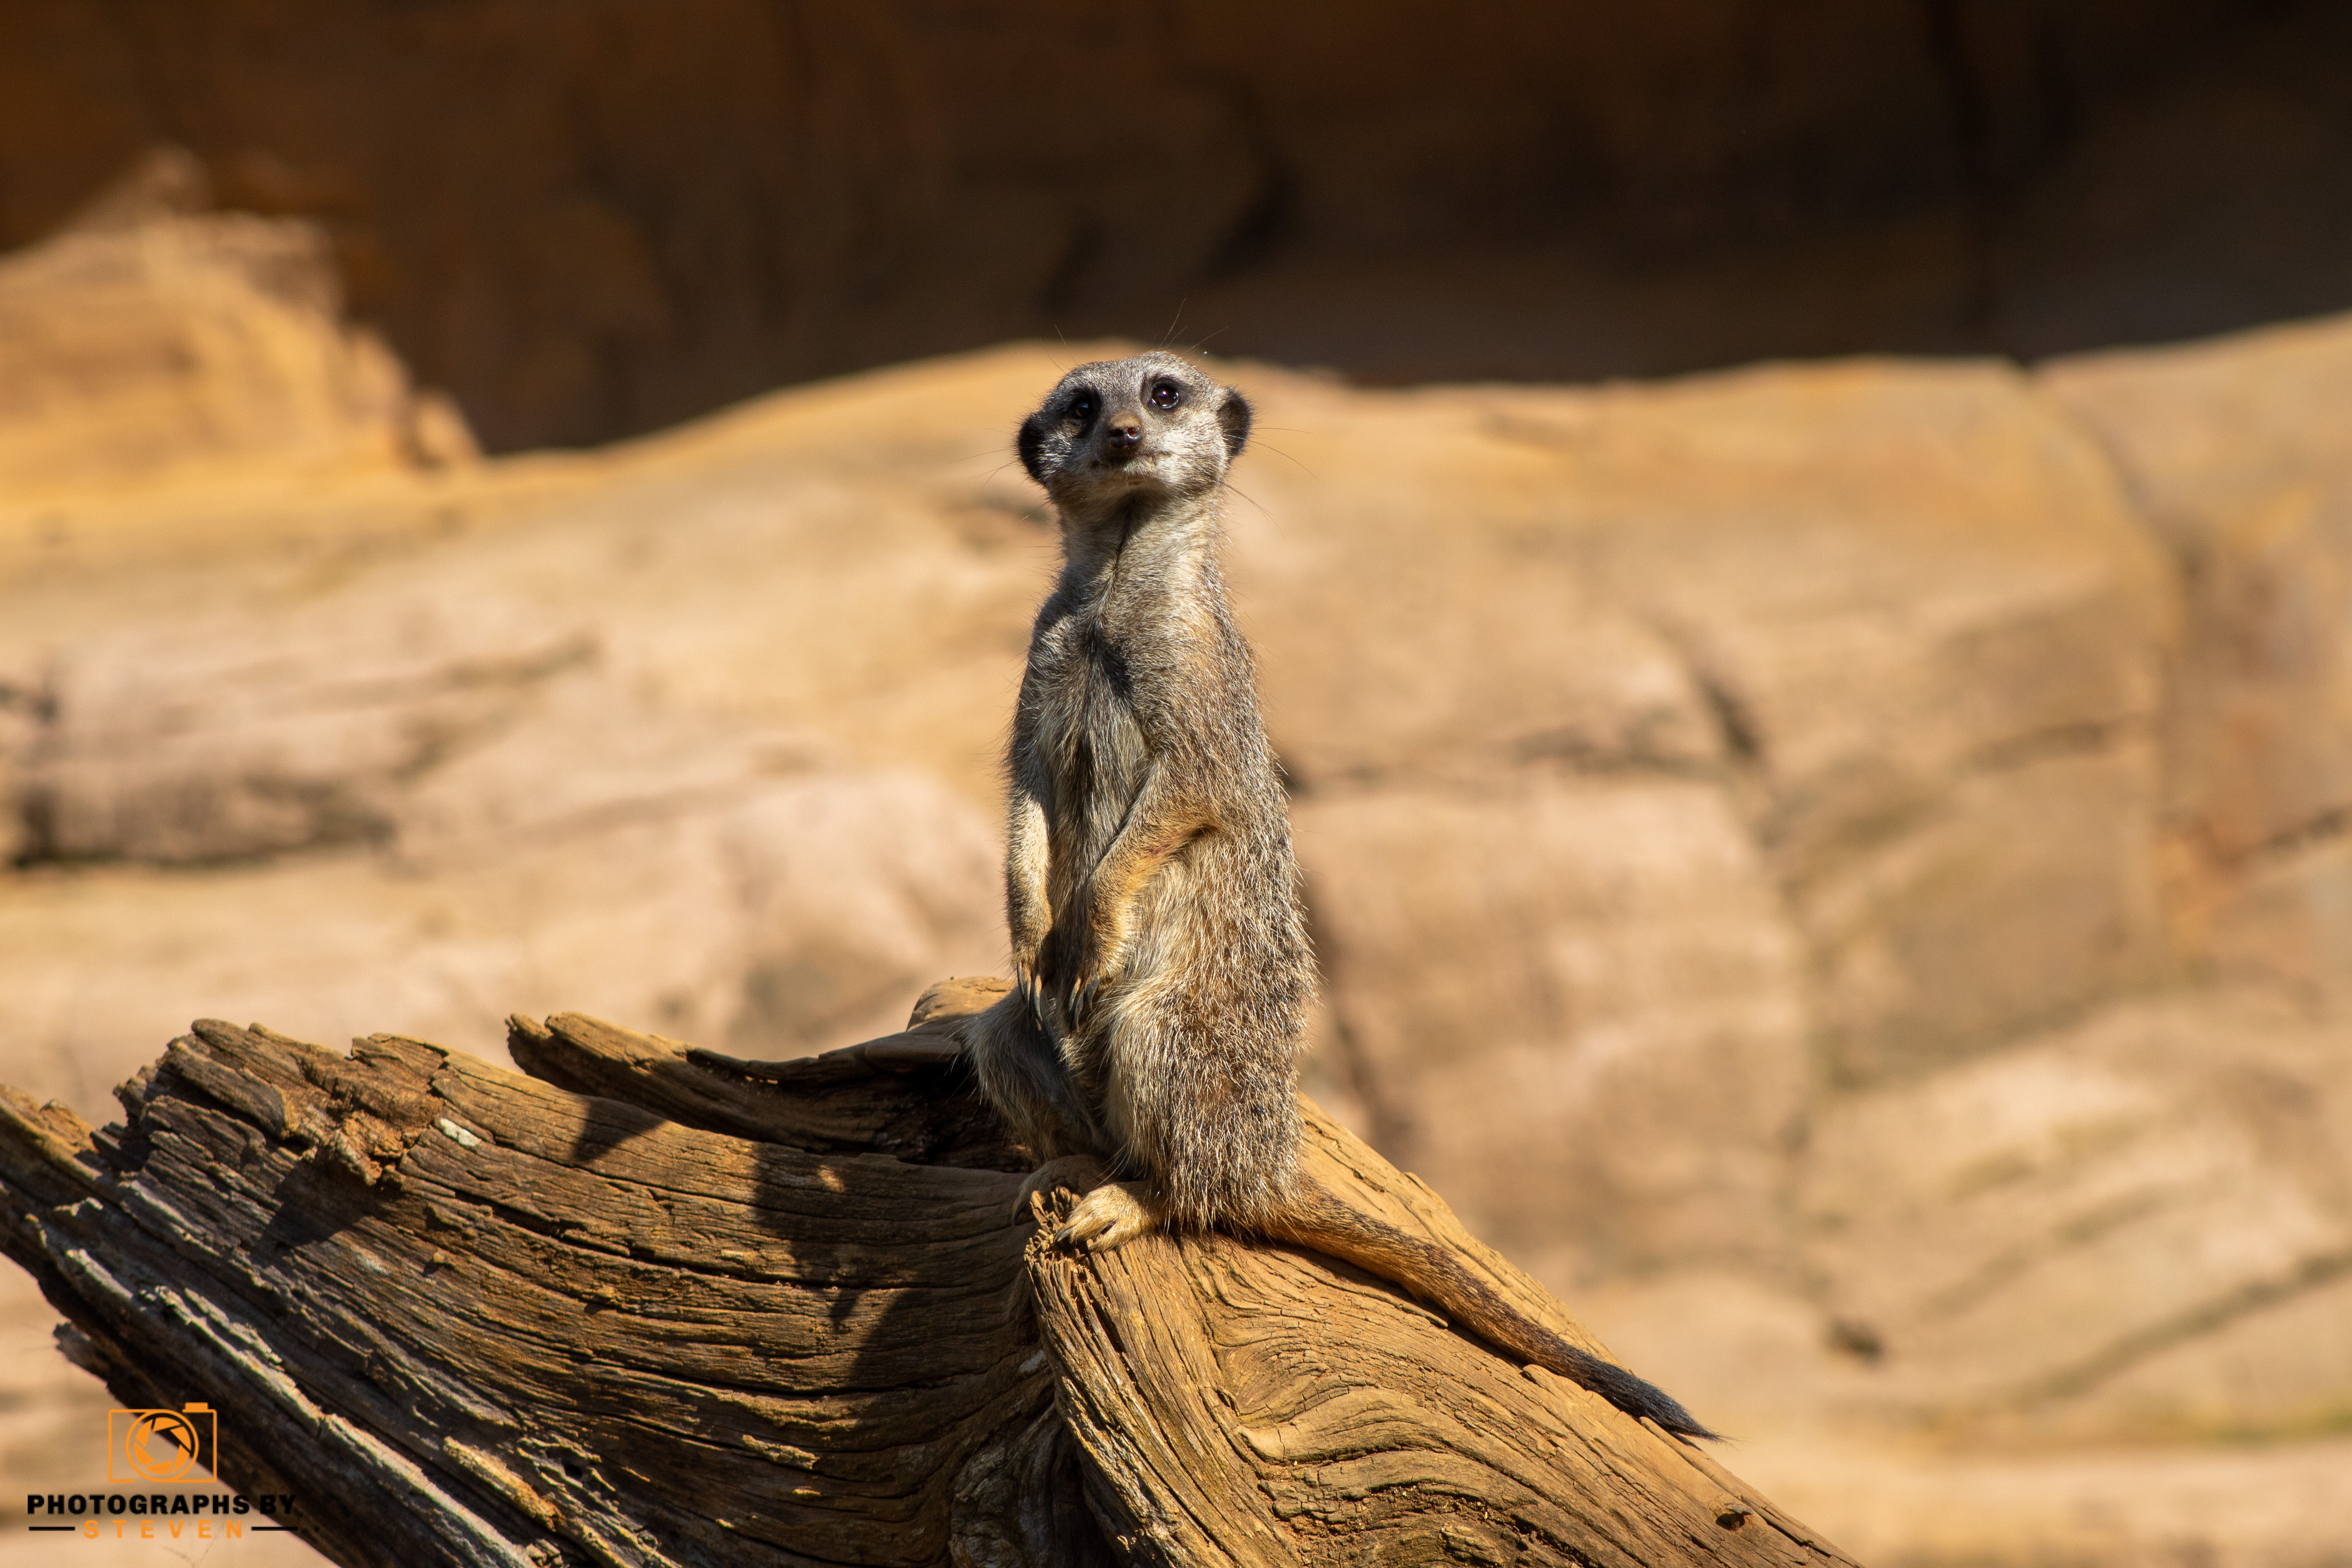 Fun facts about Meerkats